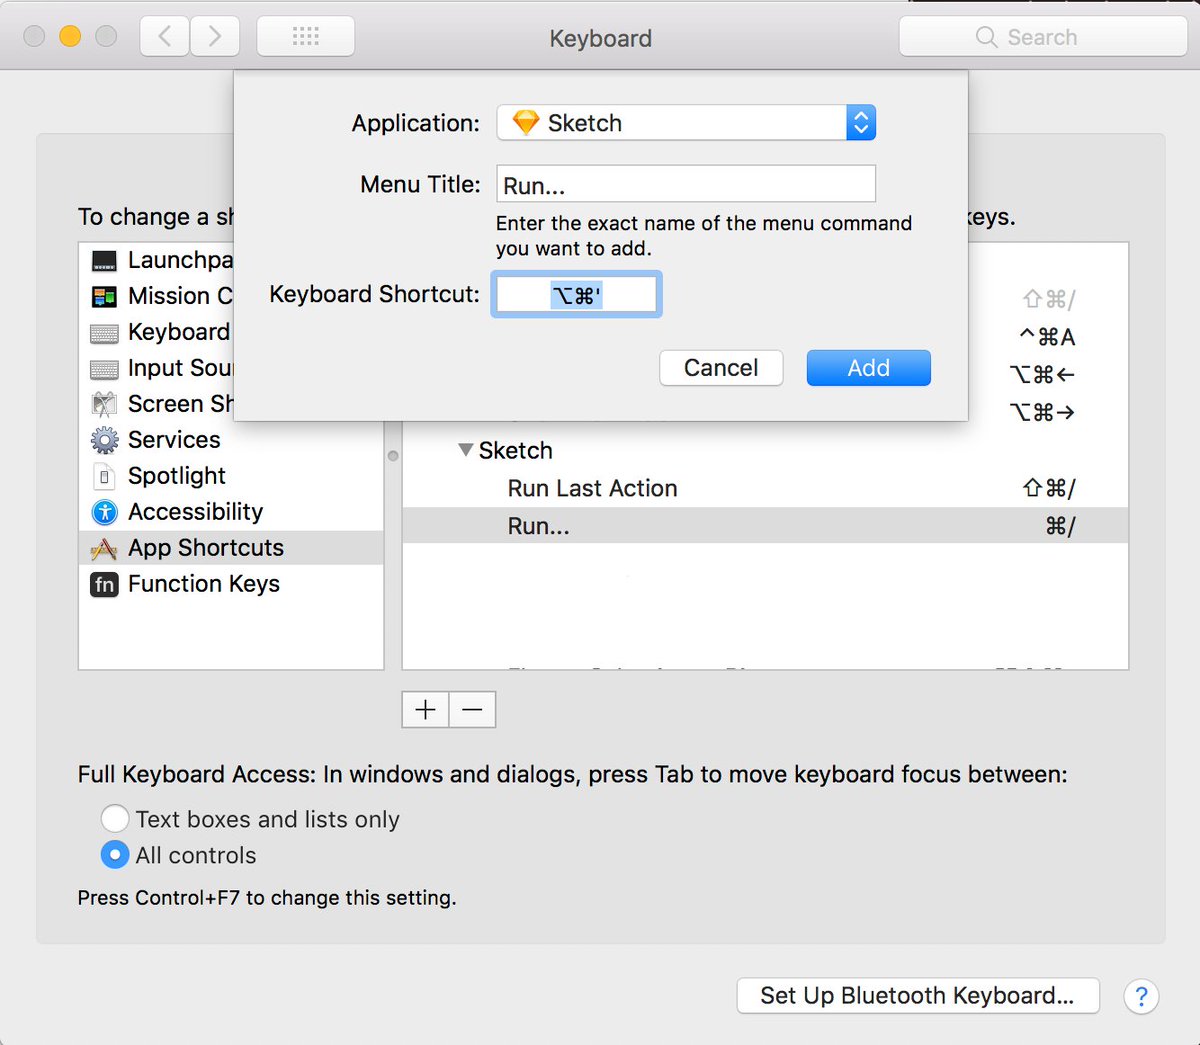 Sketch Runner The Default Shortcut Is Cmd A Custom One Can Be Set In System Preferences Under Keyboard And Then Adding An App Shortcut For Sketch With Run As The